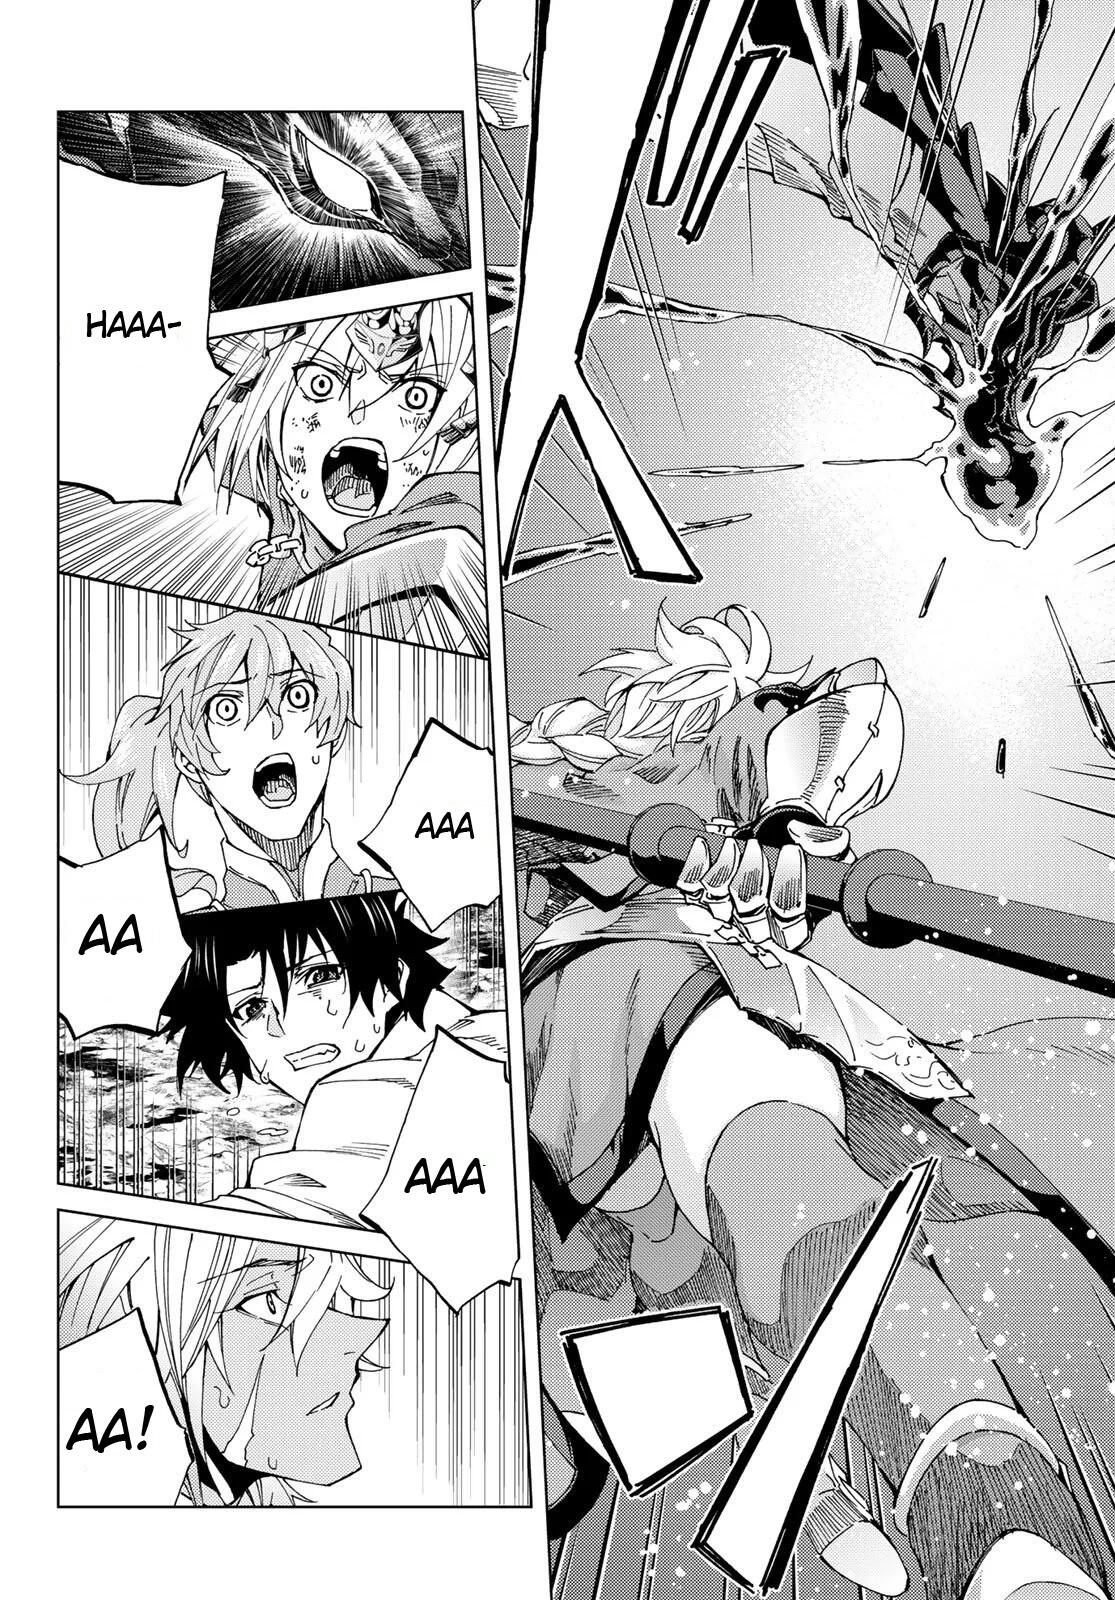 Fate Grand Order Turas Realta Chapter 15 Mangahere Today